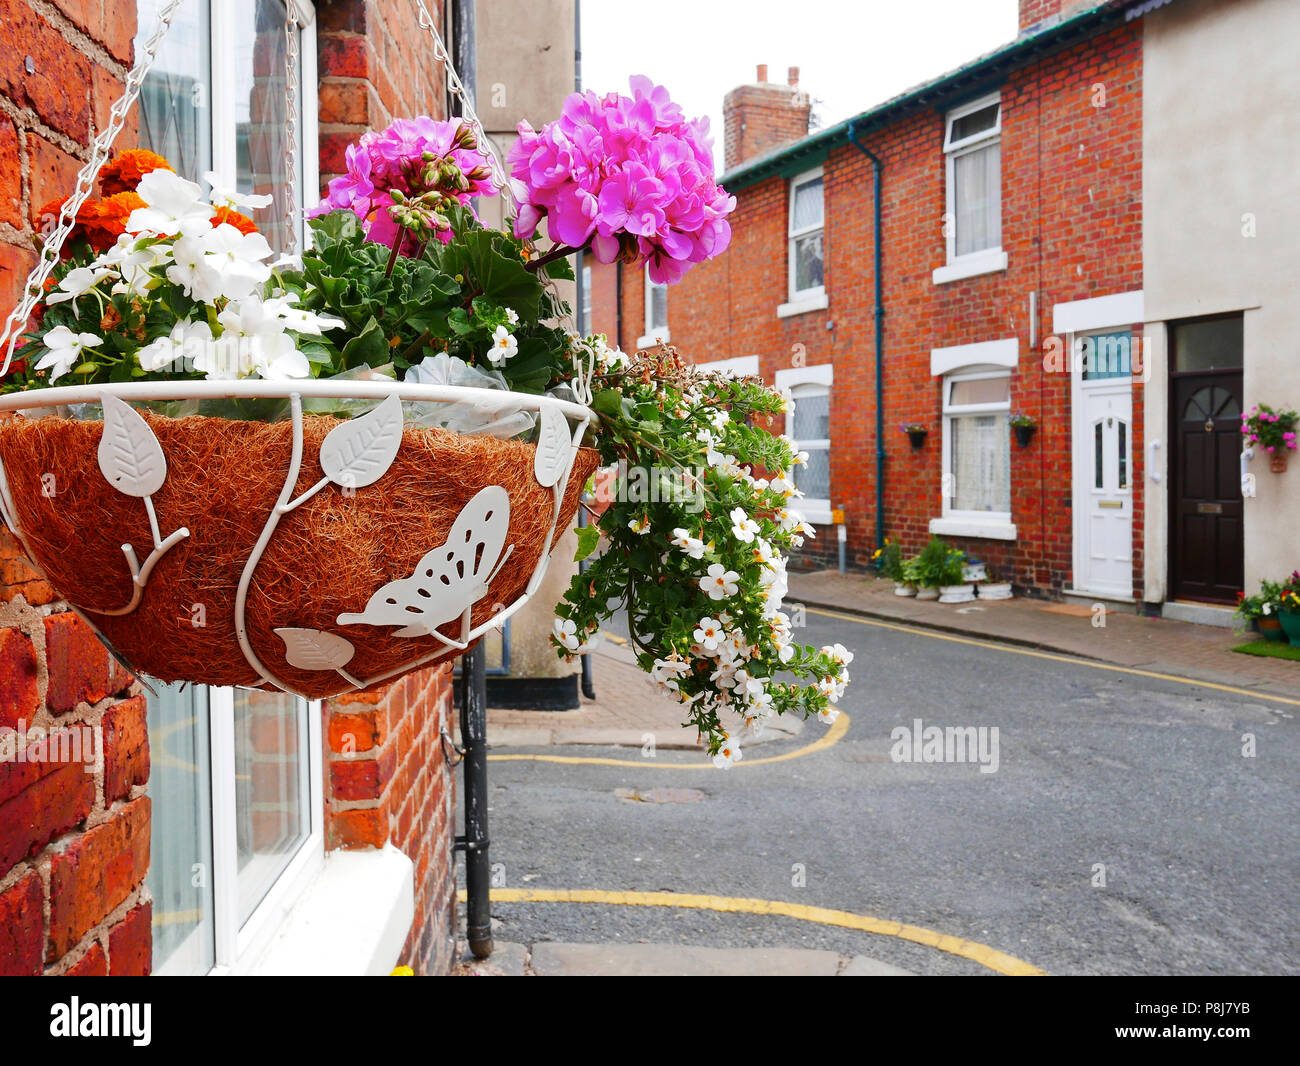 Colourful hanging basket outside a house on a narrow street of terrace houses in Fleetwood,Lancashire,UK Stock Photo